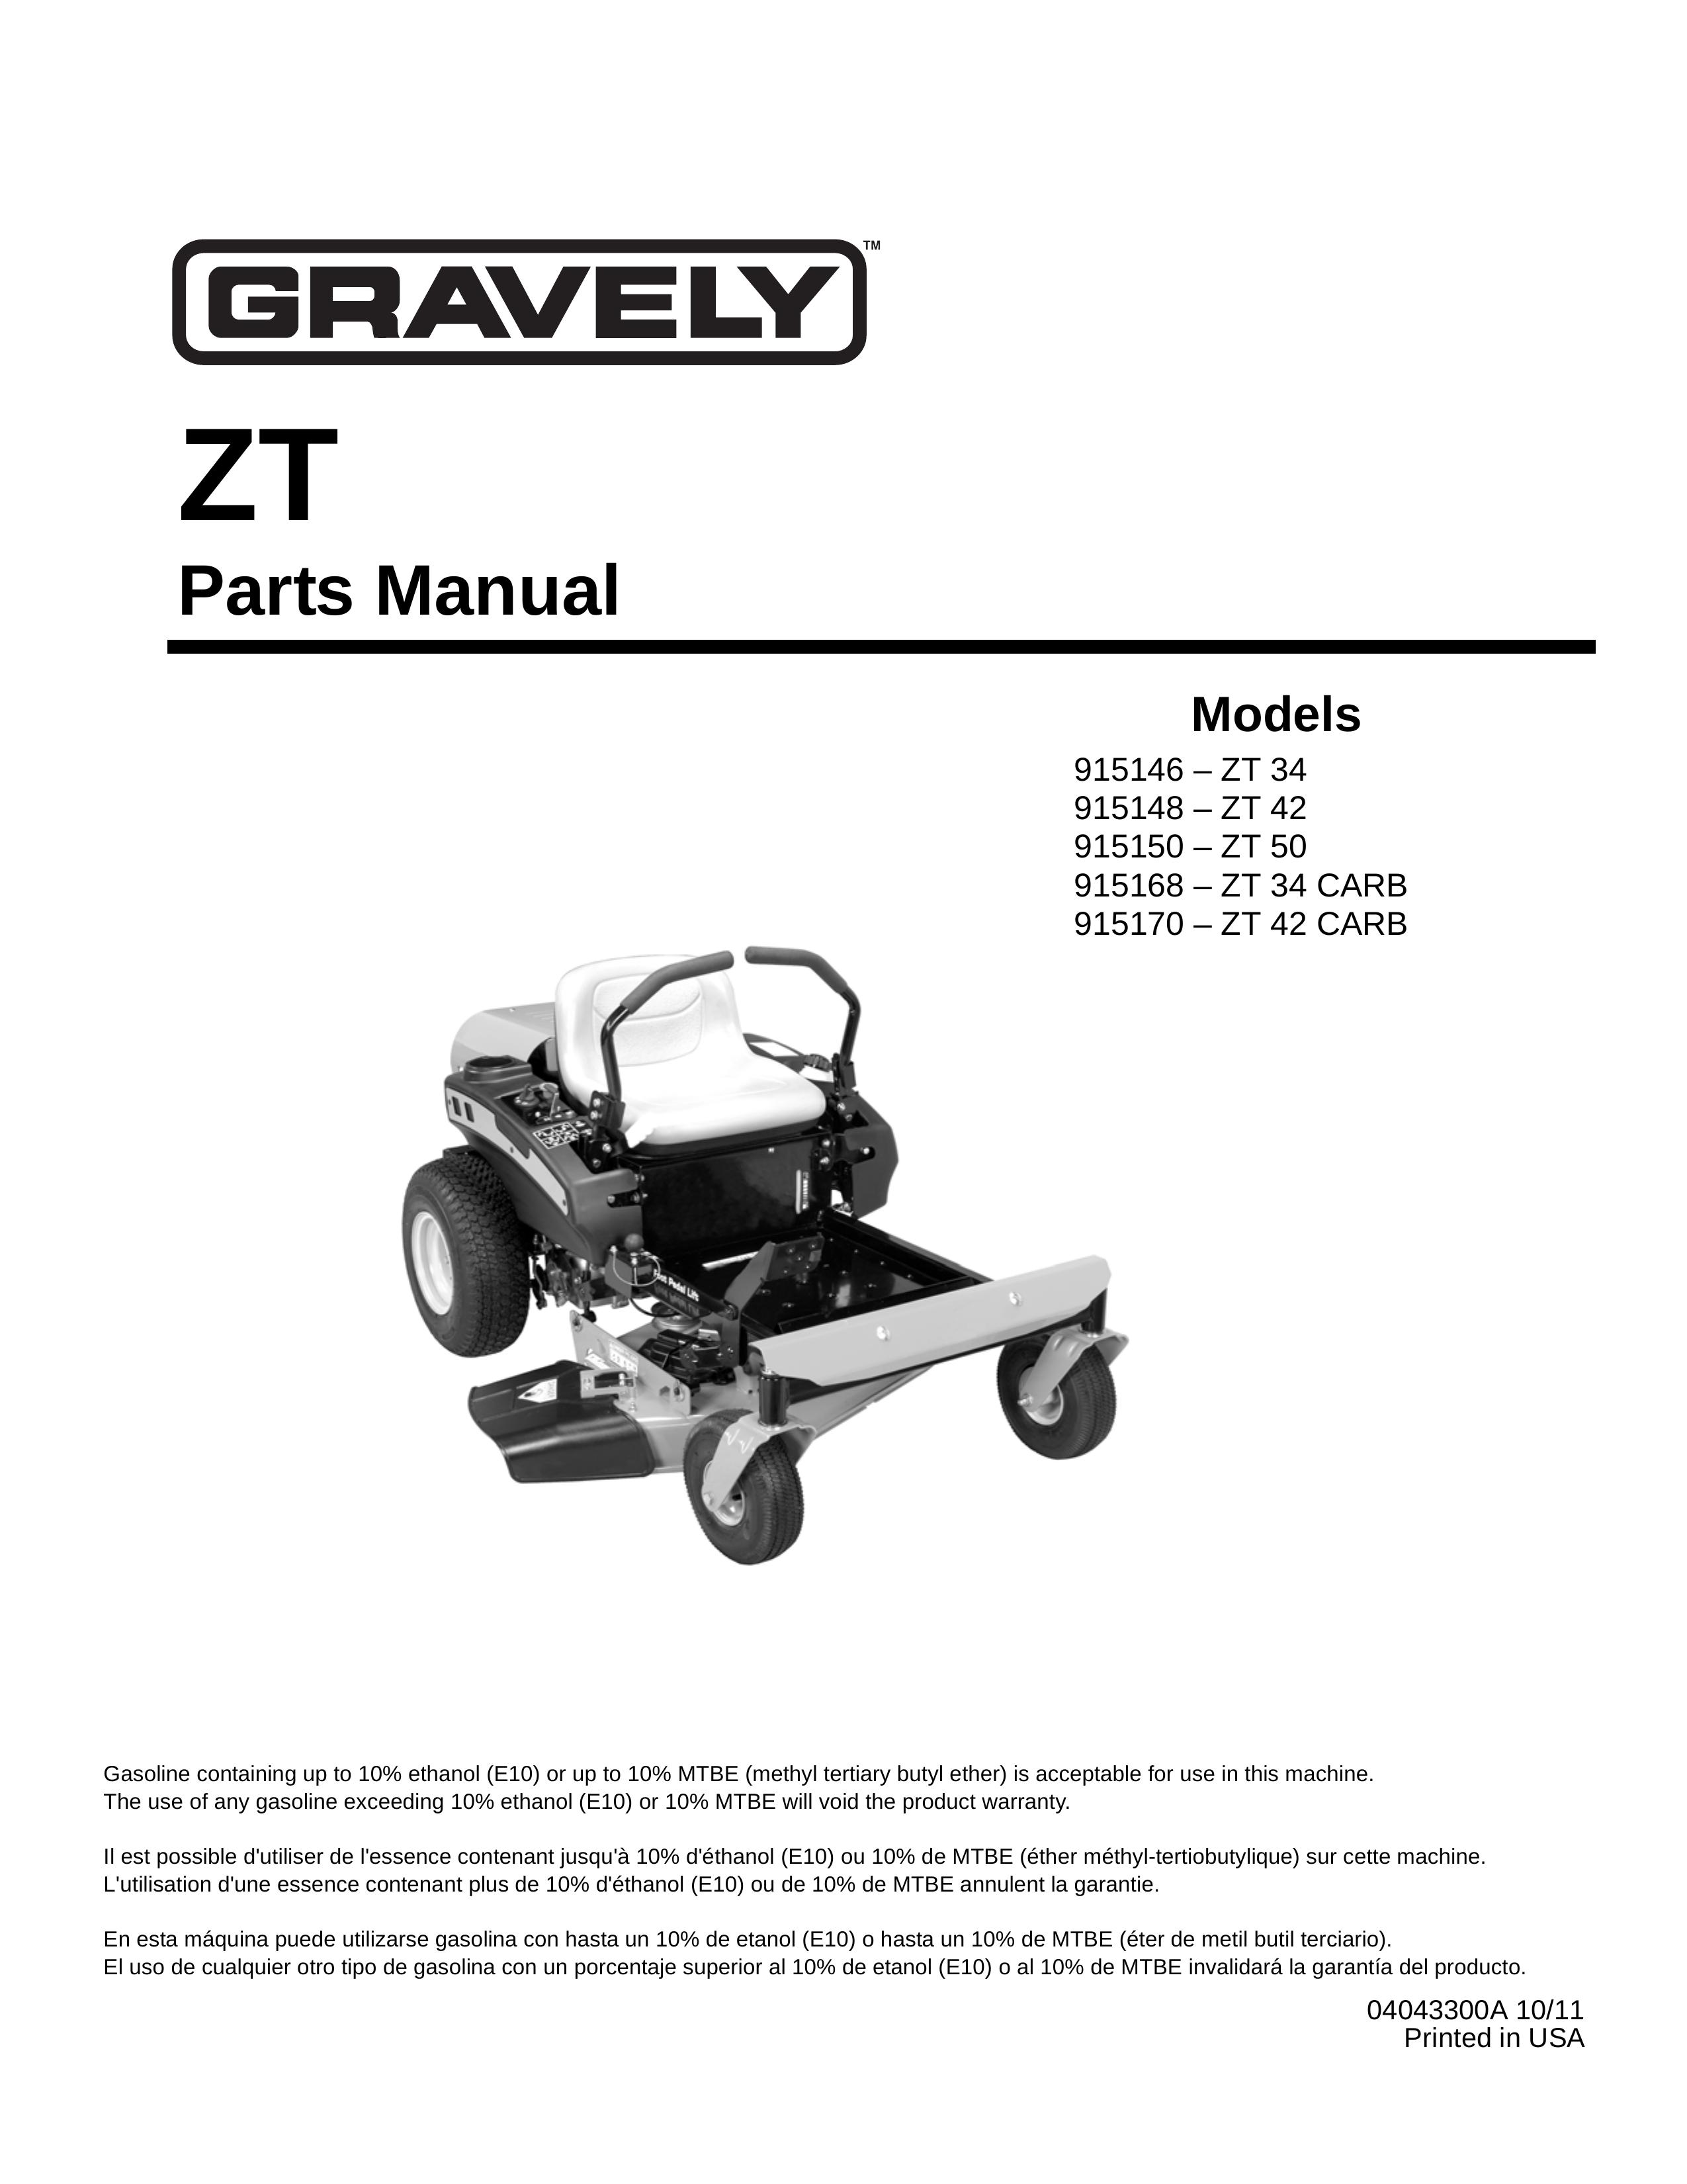 Gravely 915168 ZT 34 CARB Lawn Mower User Manual